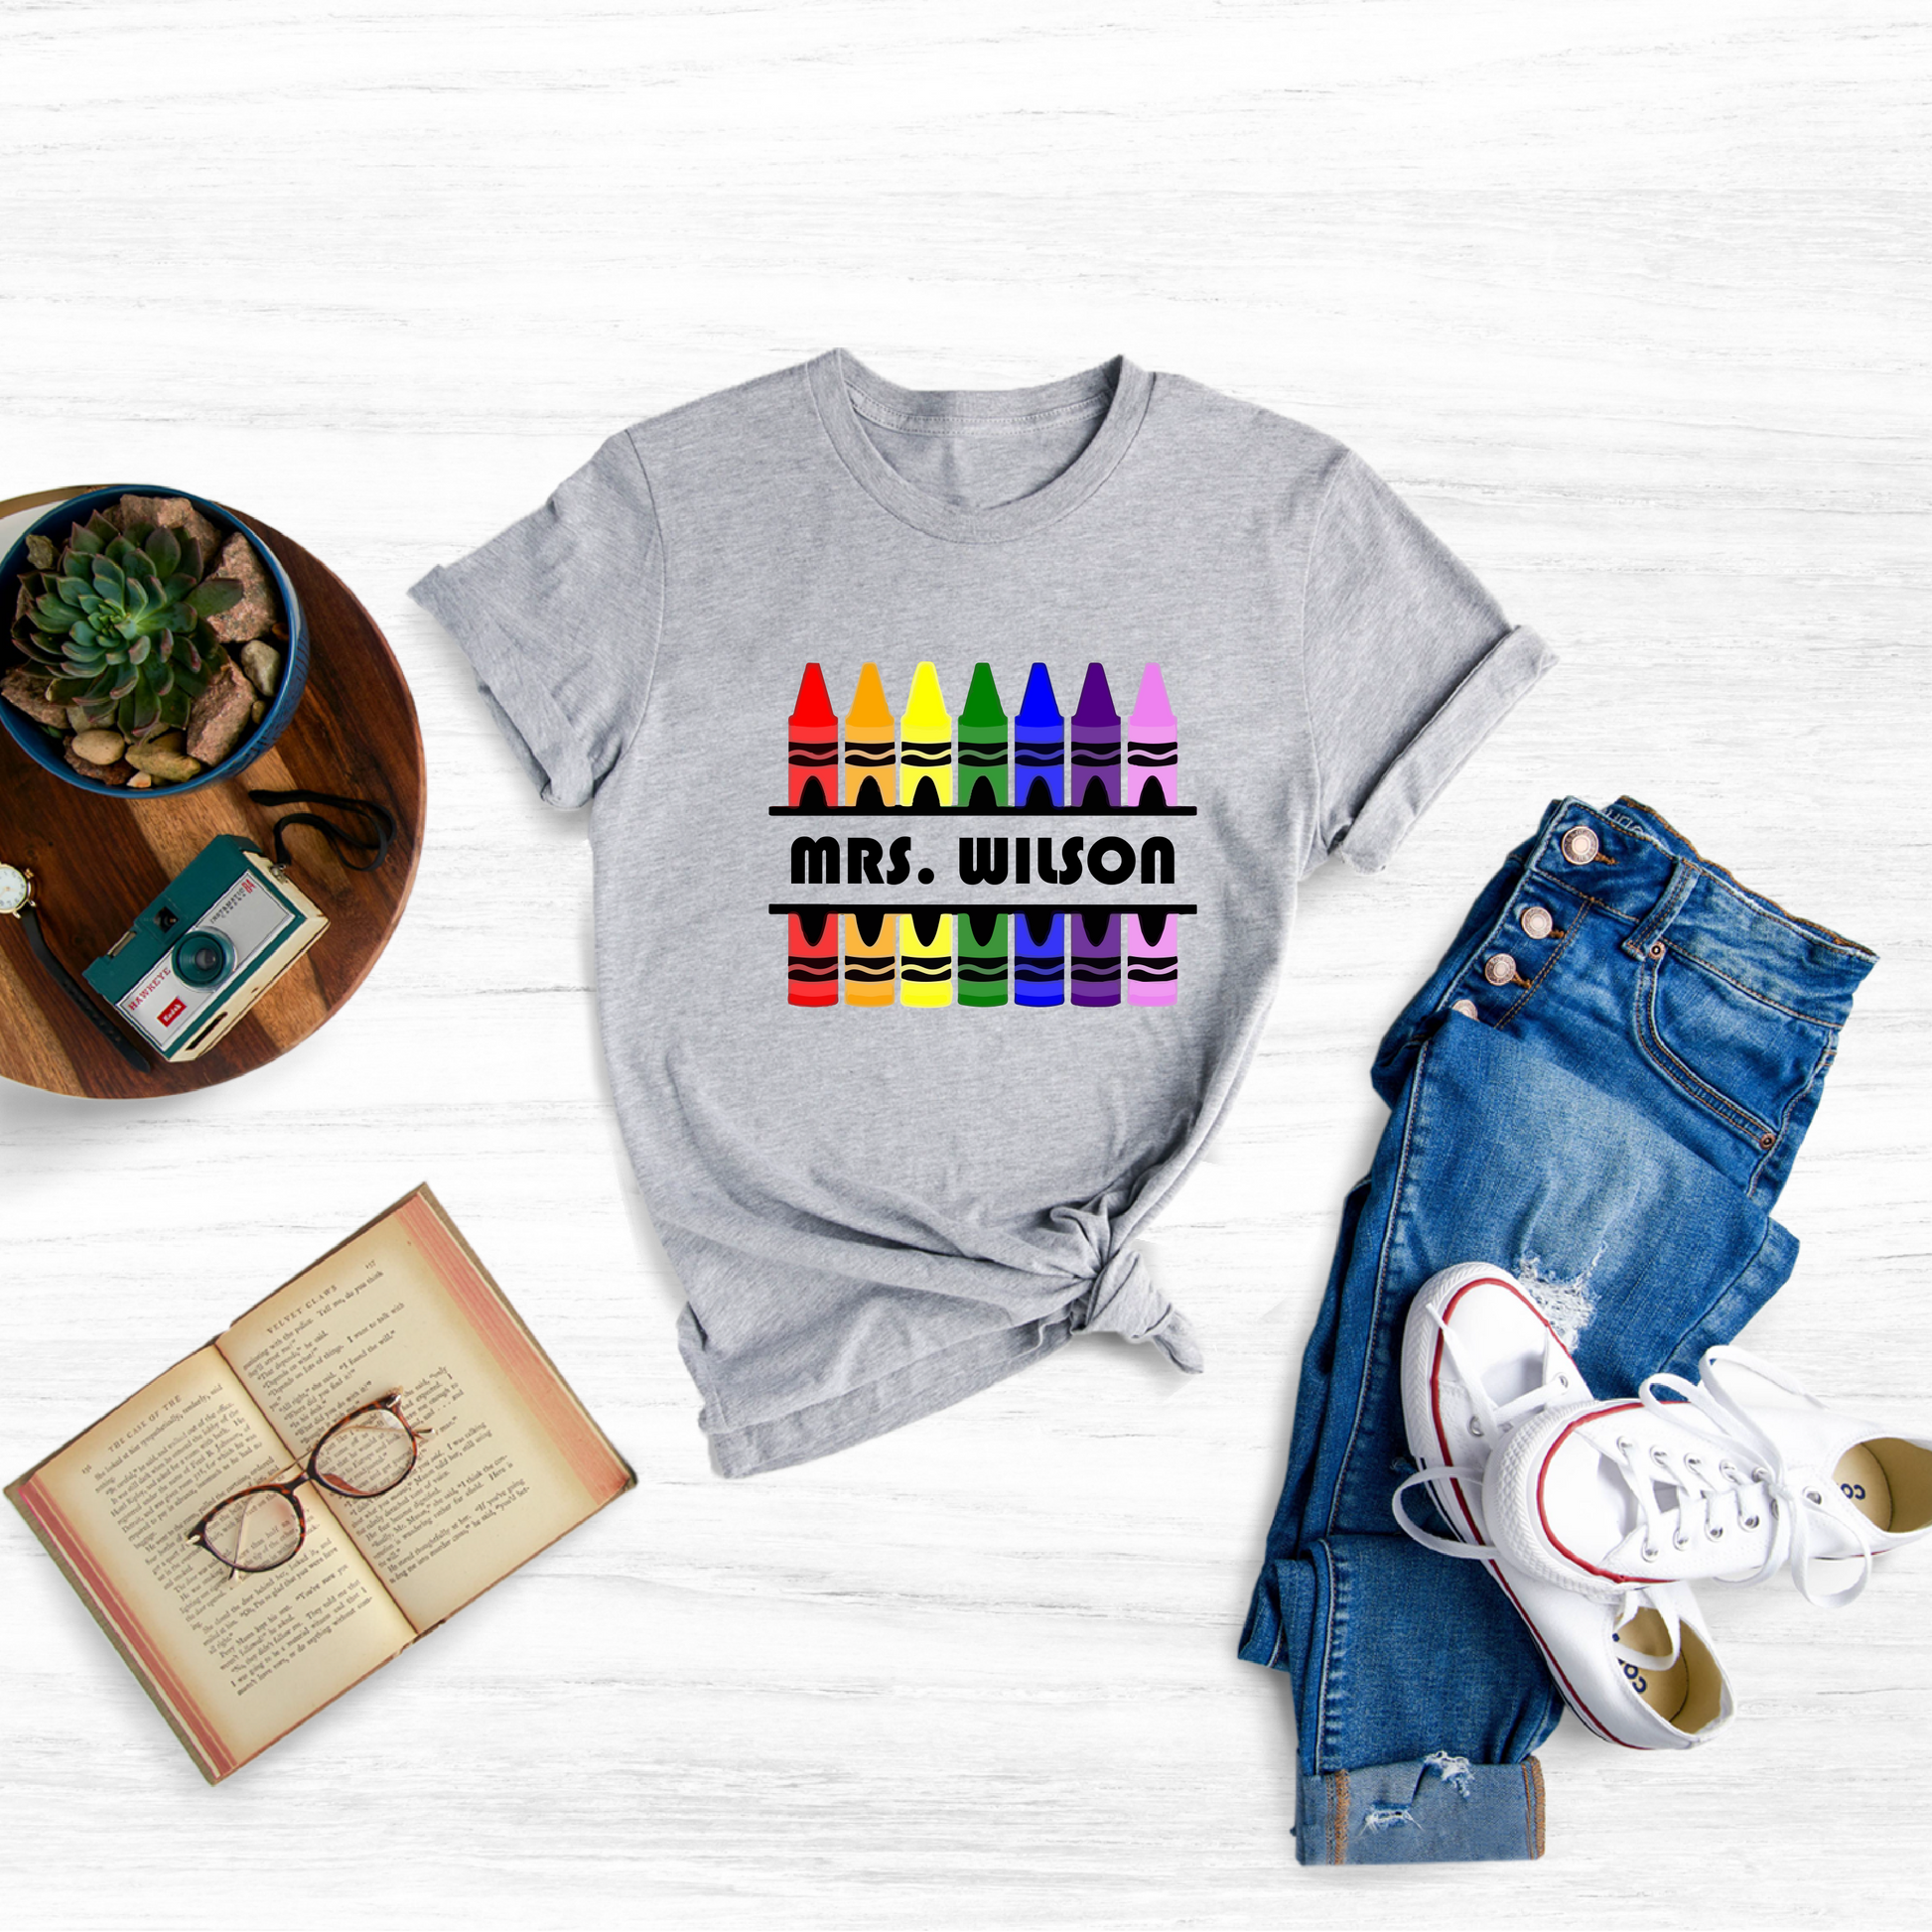 Show your appreciation for the amazing teachers in your life with our personalized "Custom Name Teacher Shirt."